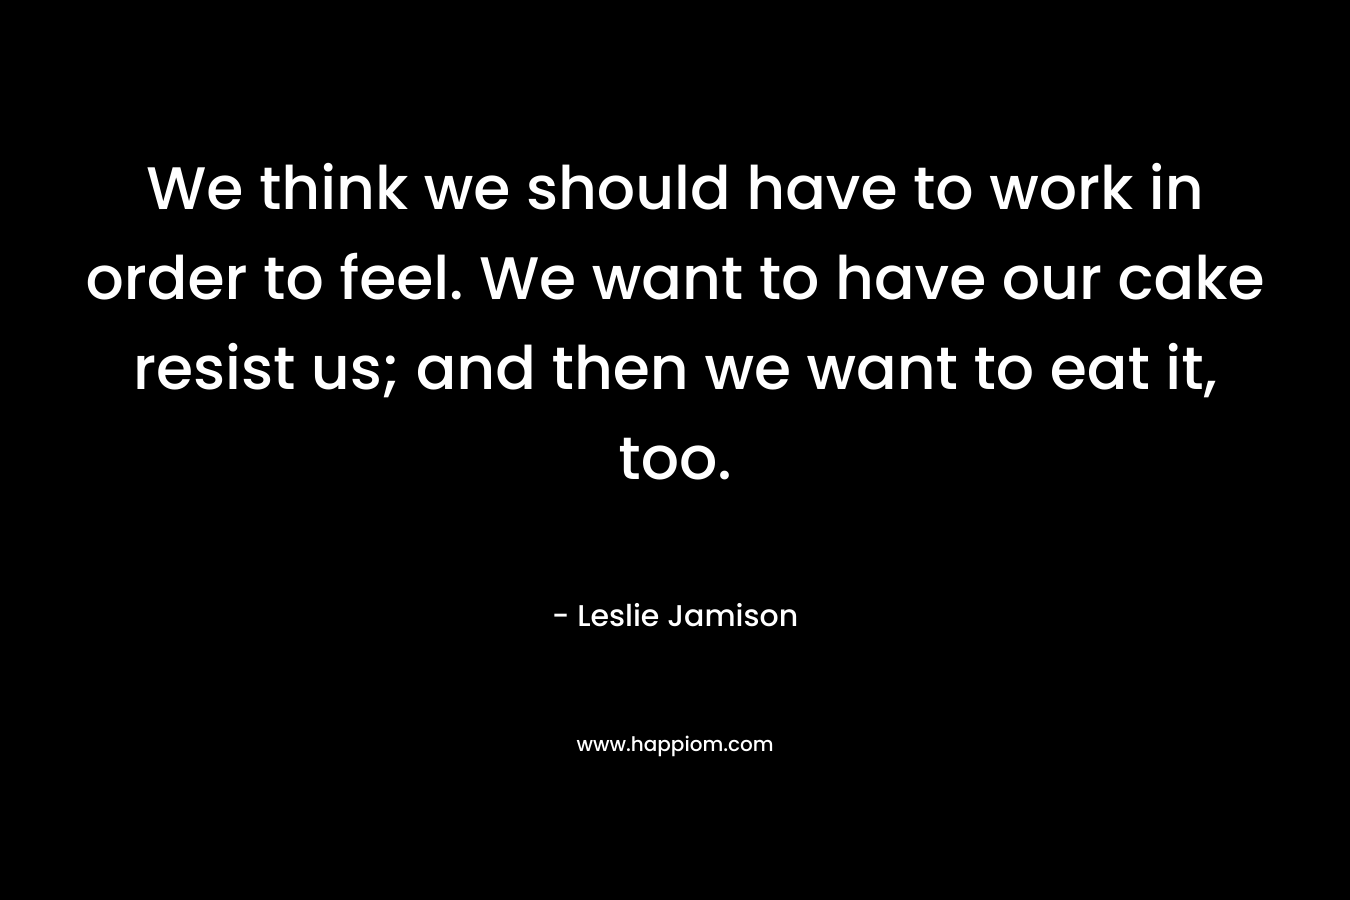 We think we should have to work in order to feel. We want to have our cake resist us; and then we want to eat it, too. – Leslie Jamison